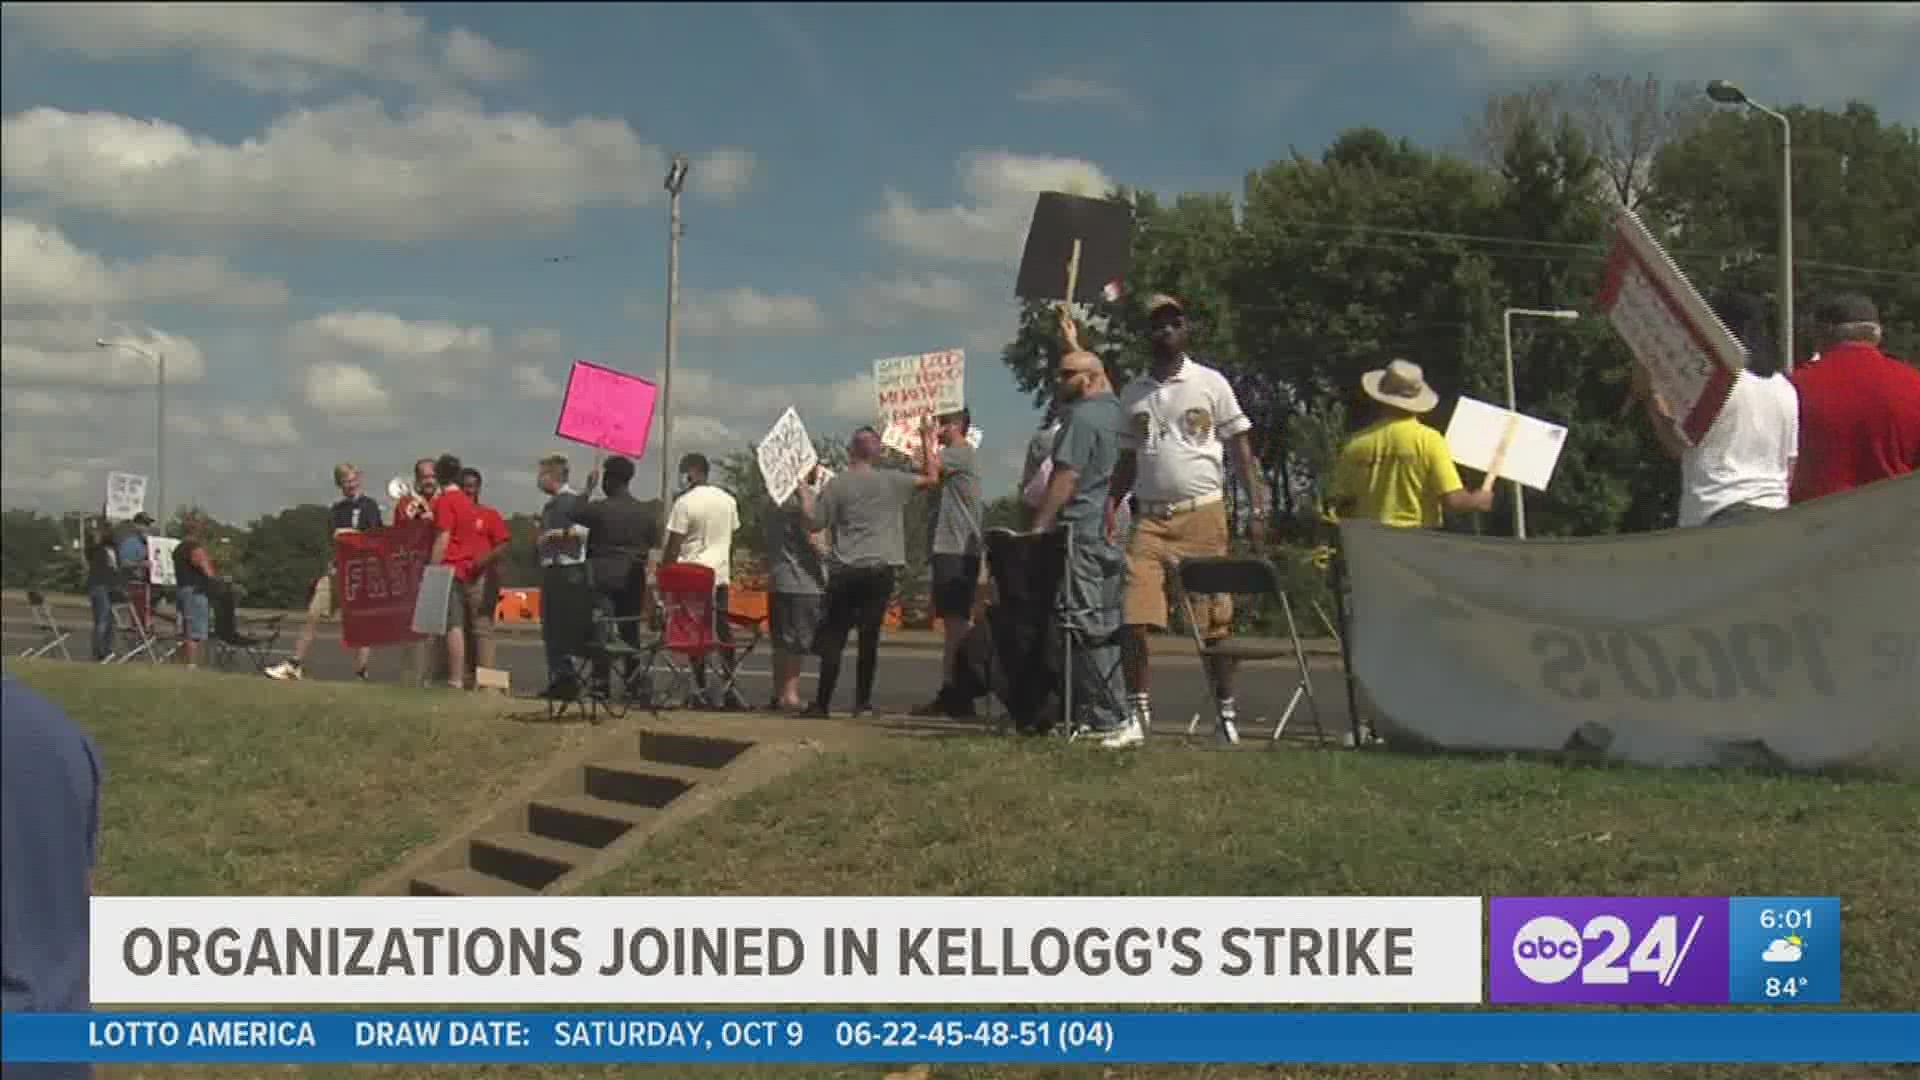 They gathered in support of those walking the picket line Wednesday.